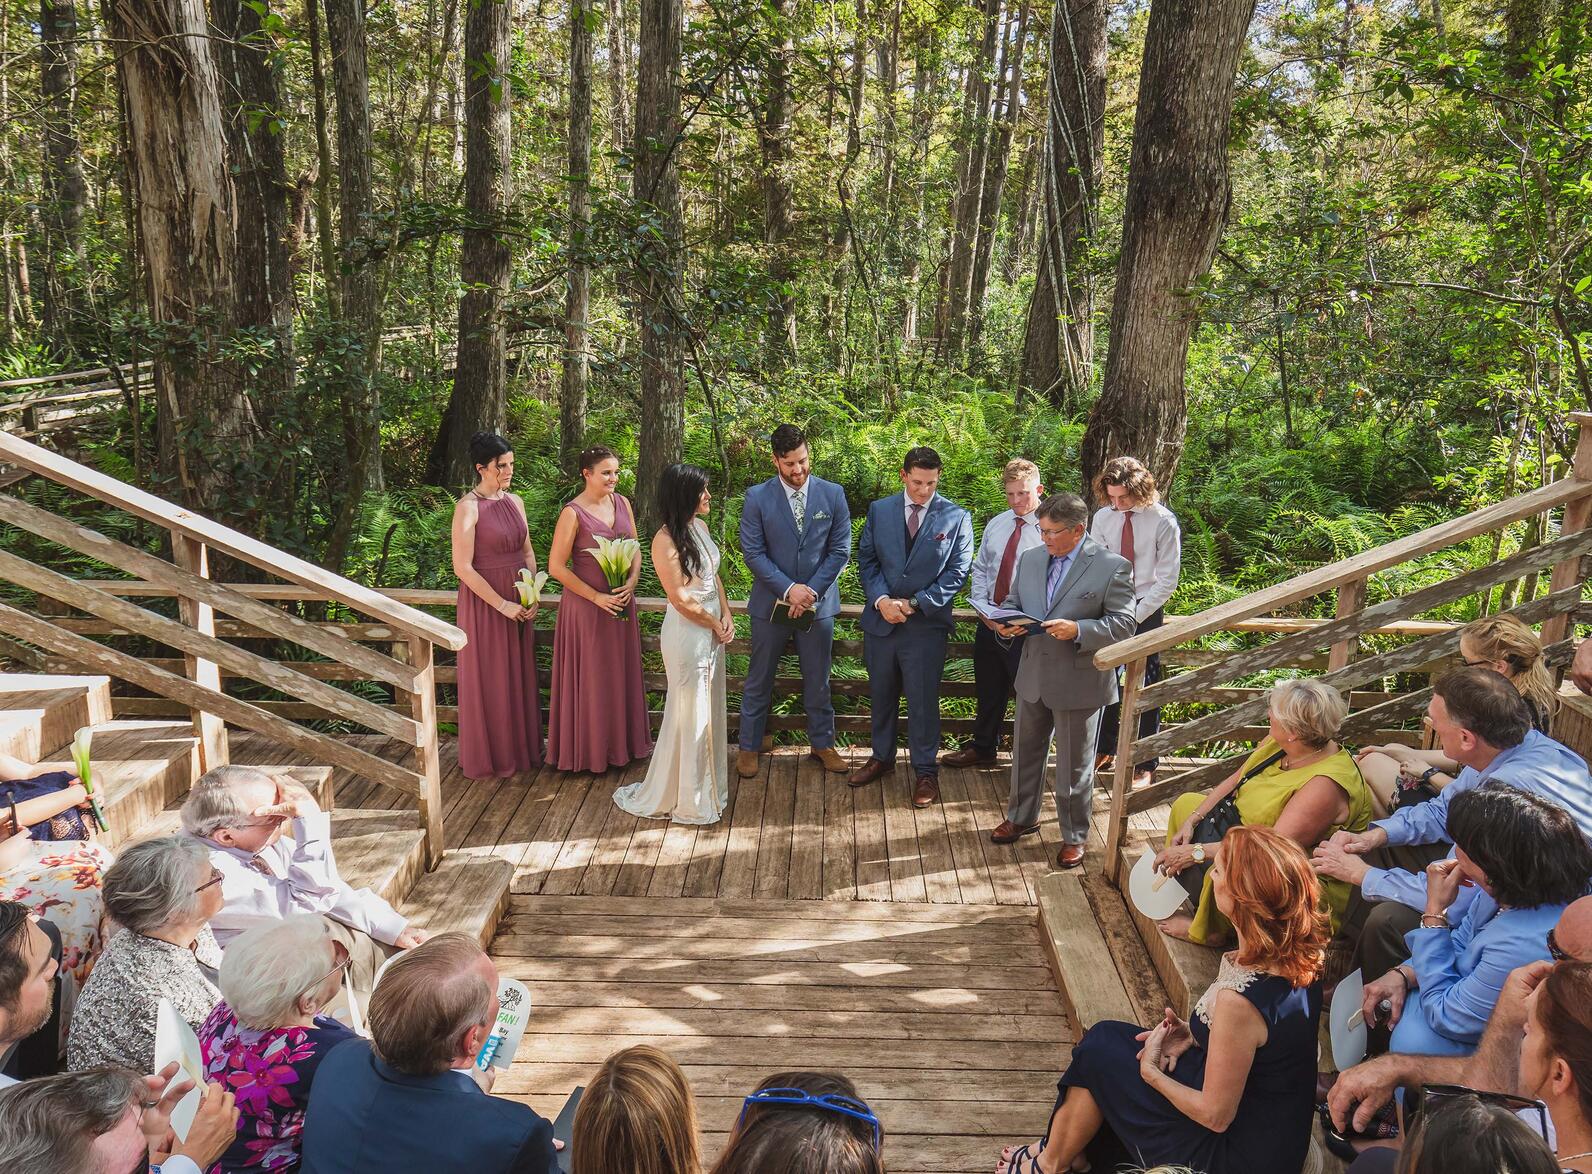 Aerial view of a wedding ceremony in the swamp